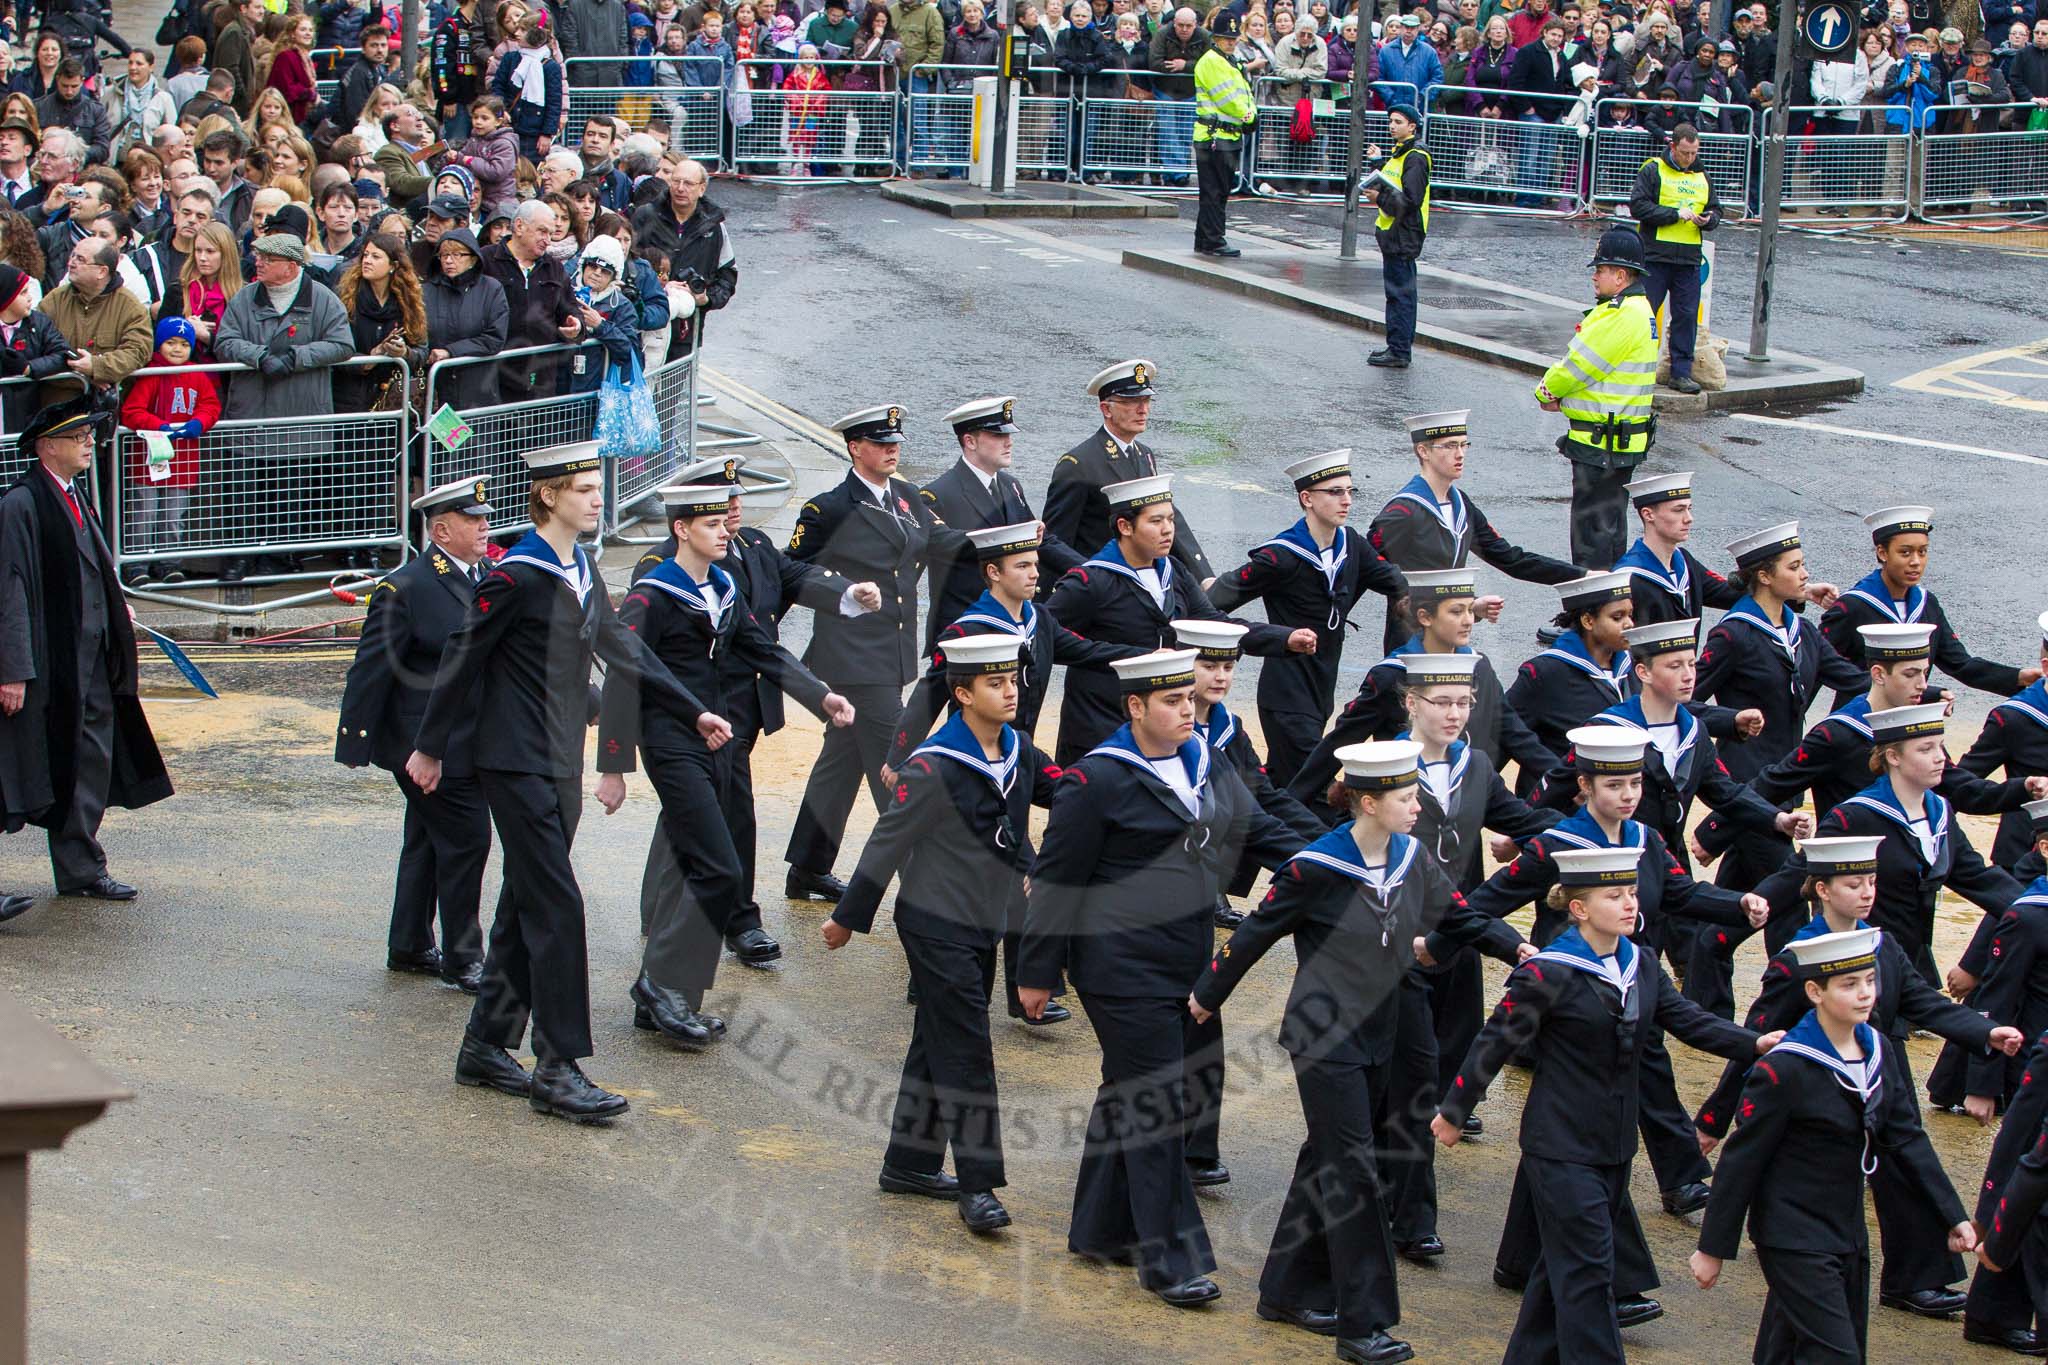 Lord Mayor's Show 2012: Entry 99 - Sea Cadet Corps (London Area)..
Press stand opposite Mansion House, City of London,
London,
Greater London,
United Kingdom,
on 10 November 2012 at 11:46, image #1326